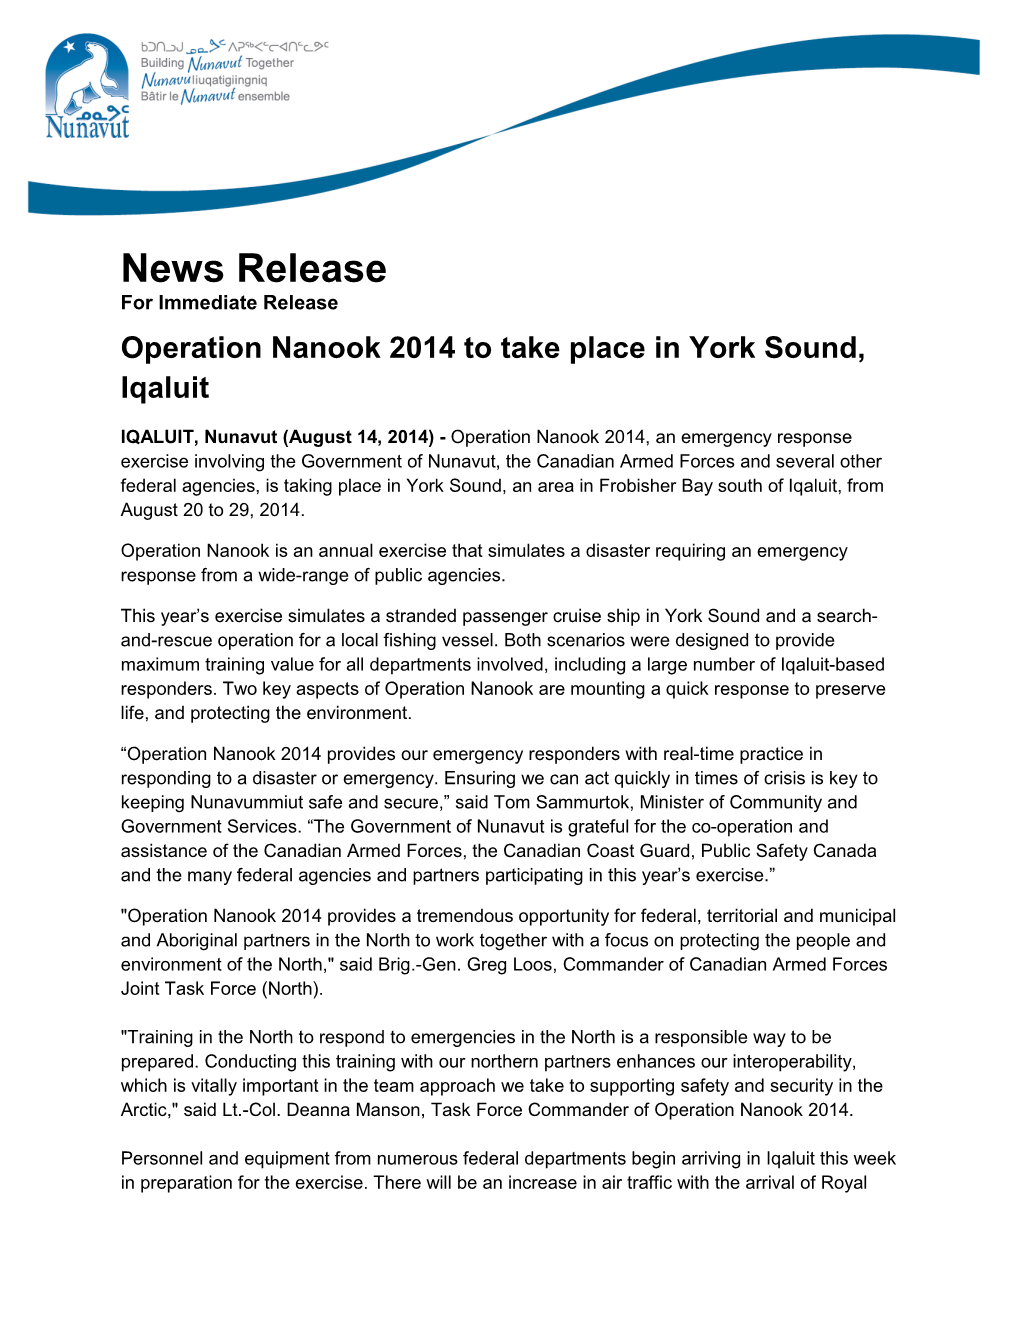 Operation Nanook 2014 to Take Place in York Sound, Iqaluit